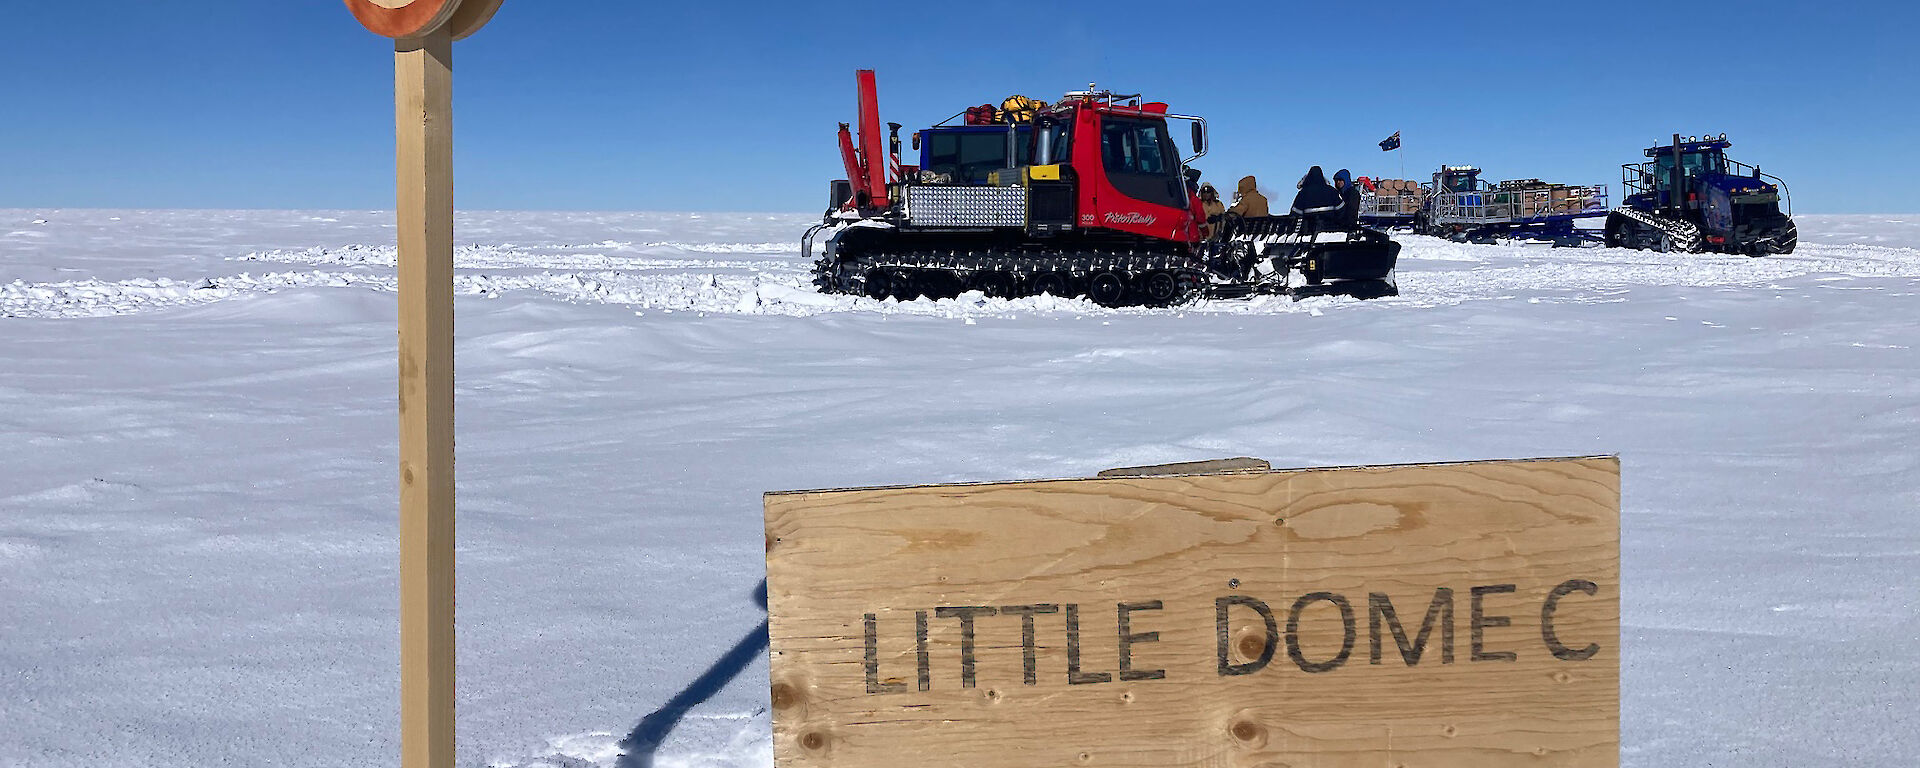 Two vehicles sit on the snow with a sign saying Little Dome C